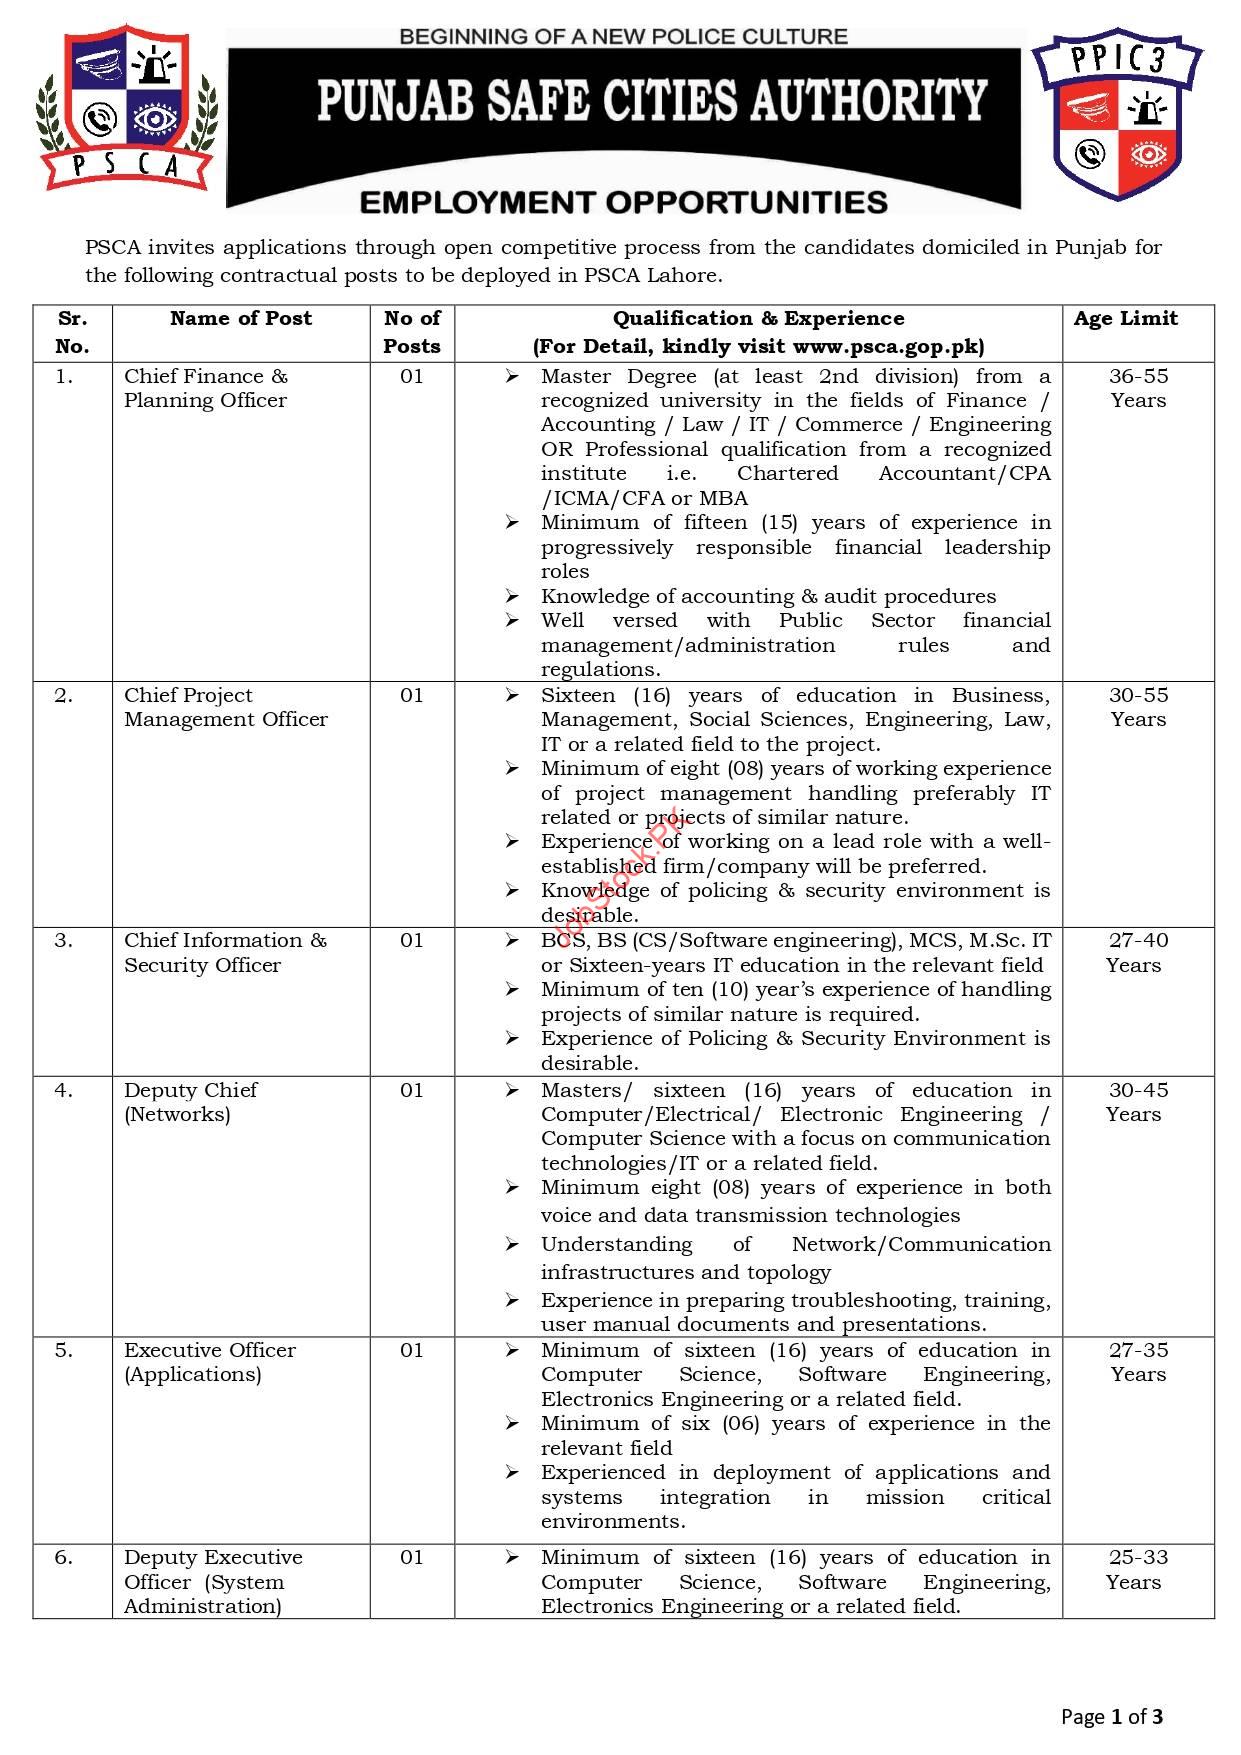 PSCA Jobs 2022 Advertisement Page 1